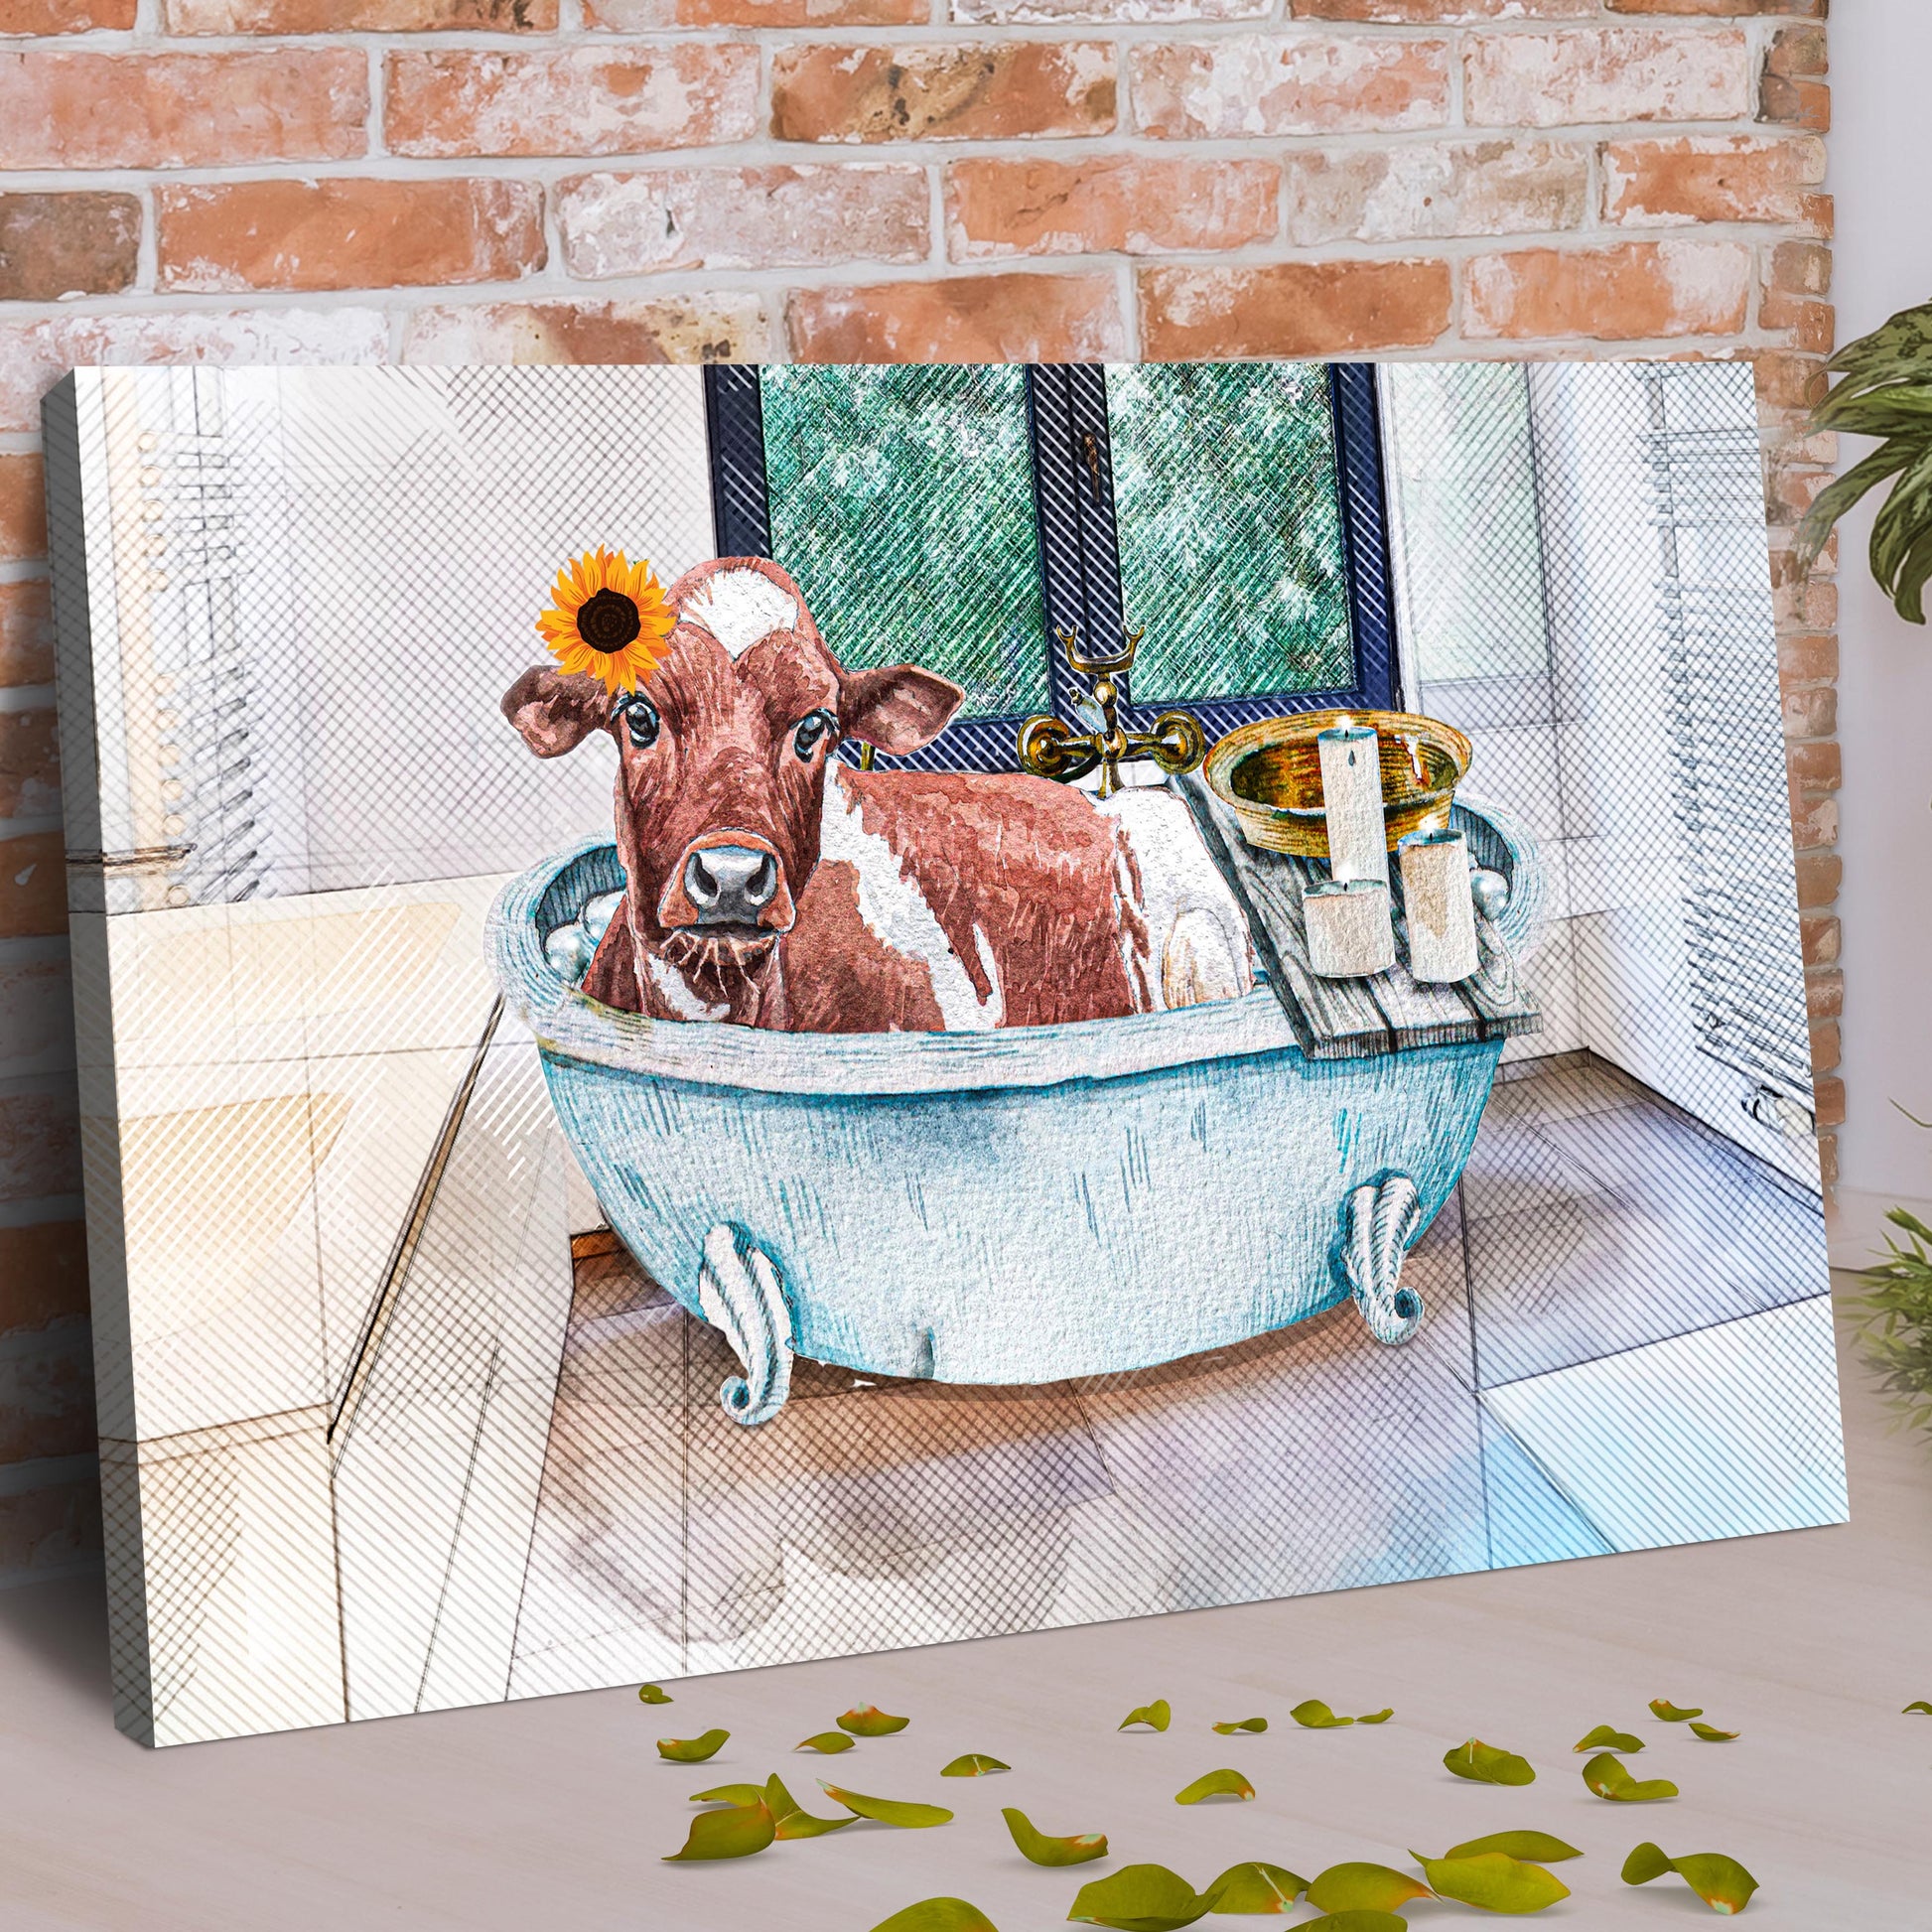 Cow Cattle In Bathtub Canvas Wall Art Style 1 - Image by Tailored Canvases